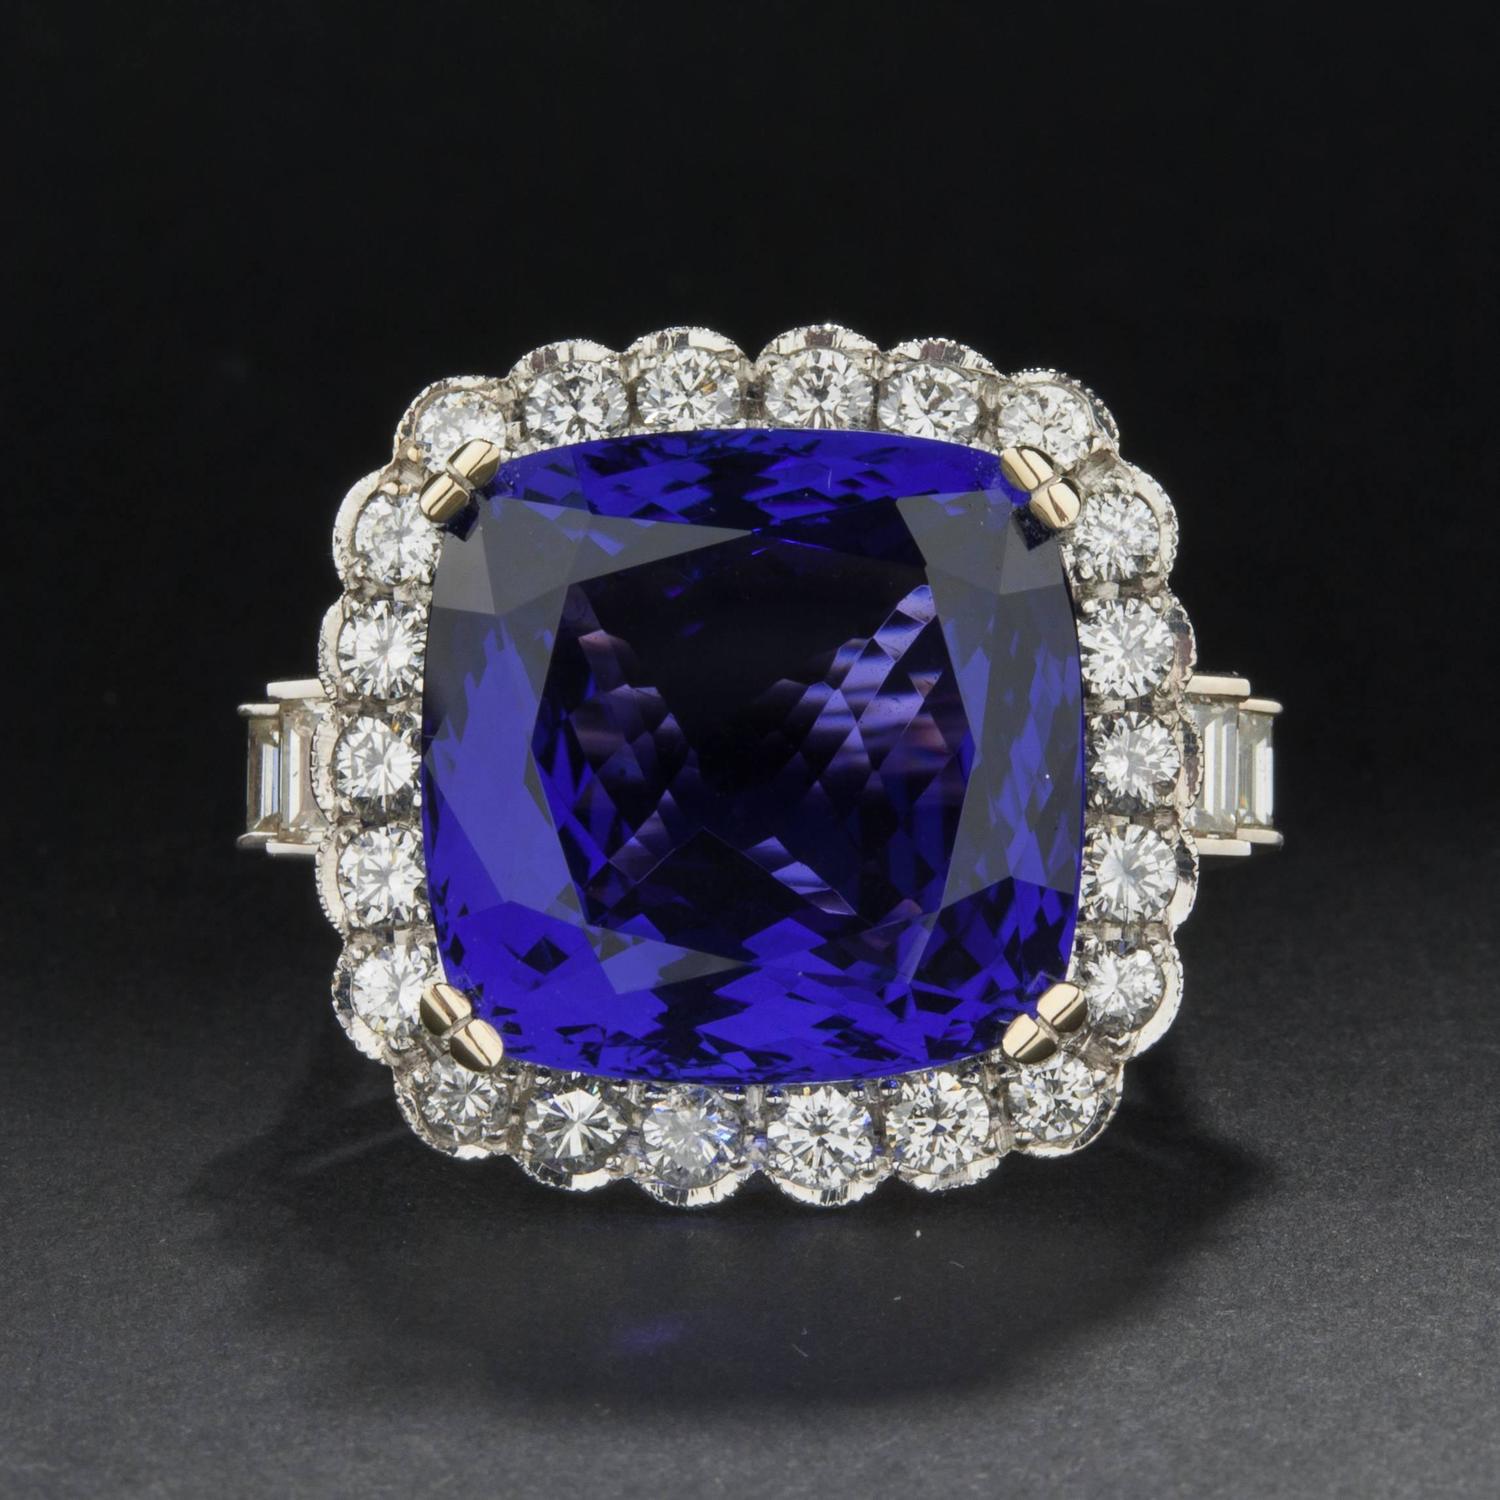 24.59ct Tanzanite and Diamond Ring For Sale at 1stdibs